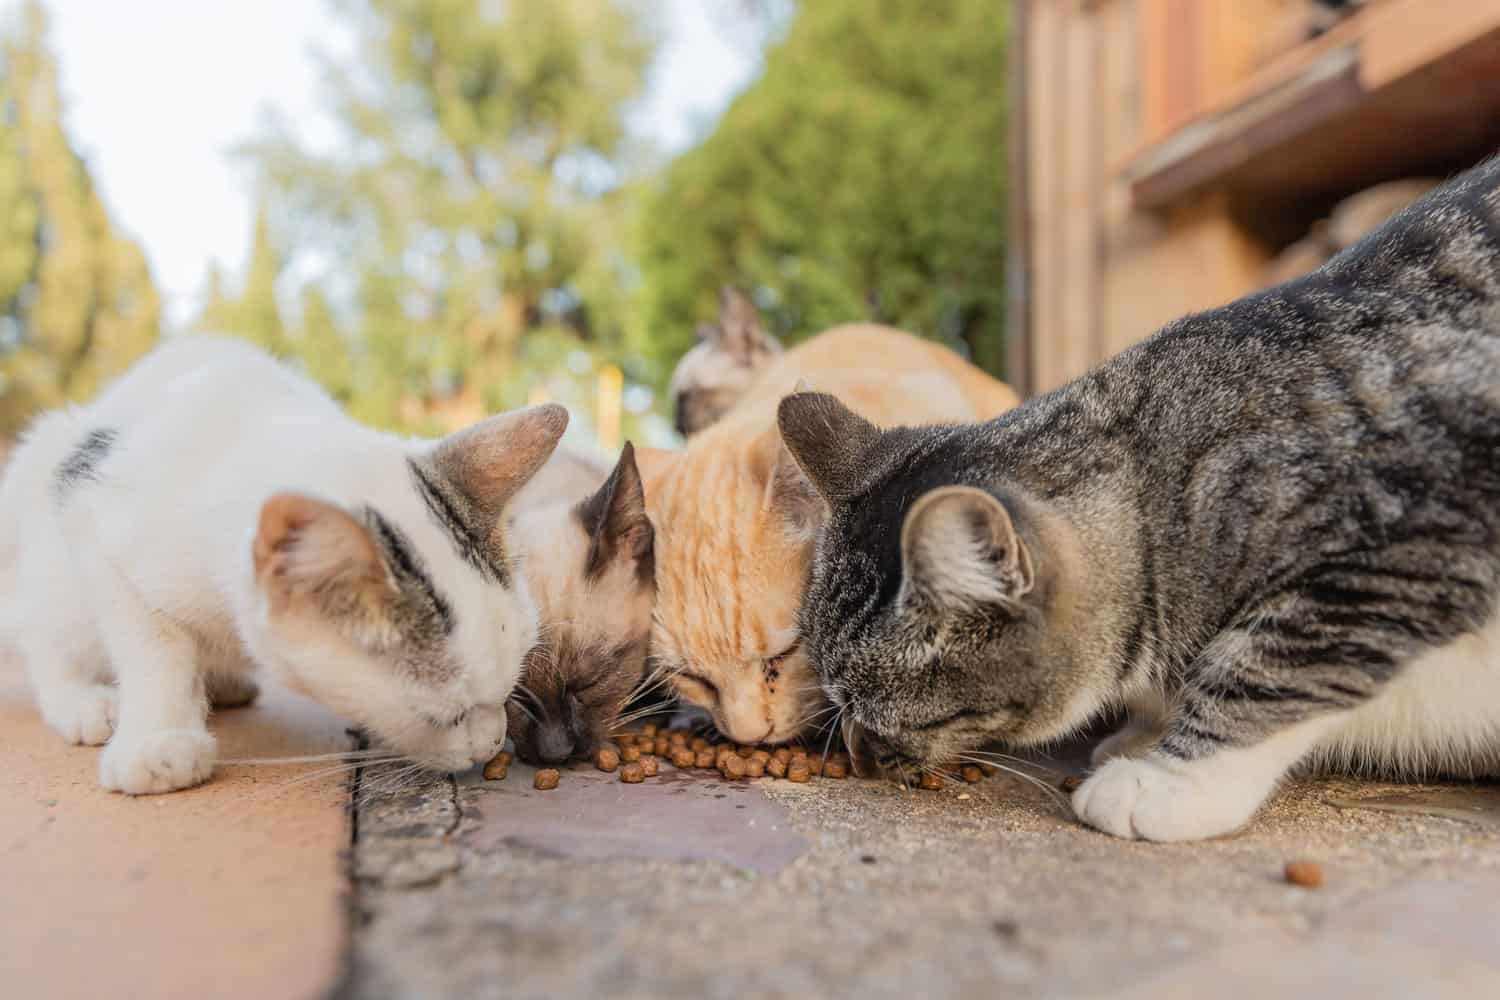 https://thecatsite.com/c/wp-content/uploads/2023/07/Colony-of-cats-feeding.-Wild-cats-living-outdoors.-A-group-of-stray-cats-eating-the-dry-cat-food-that-their-caregivers-give-them-3.jpg